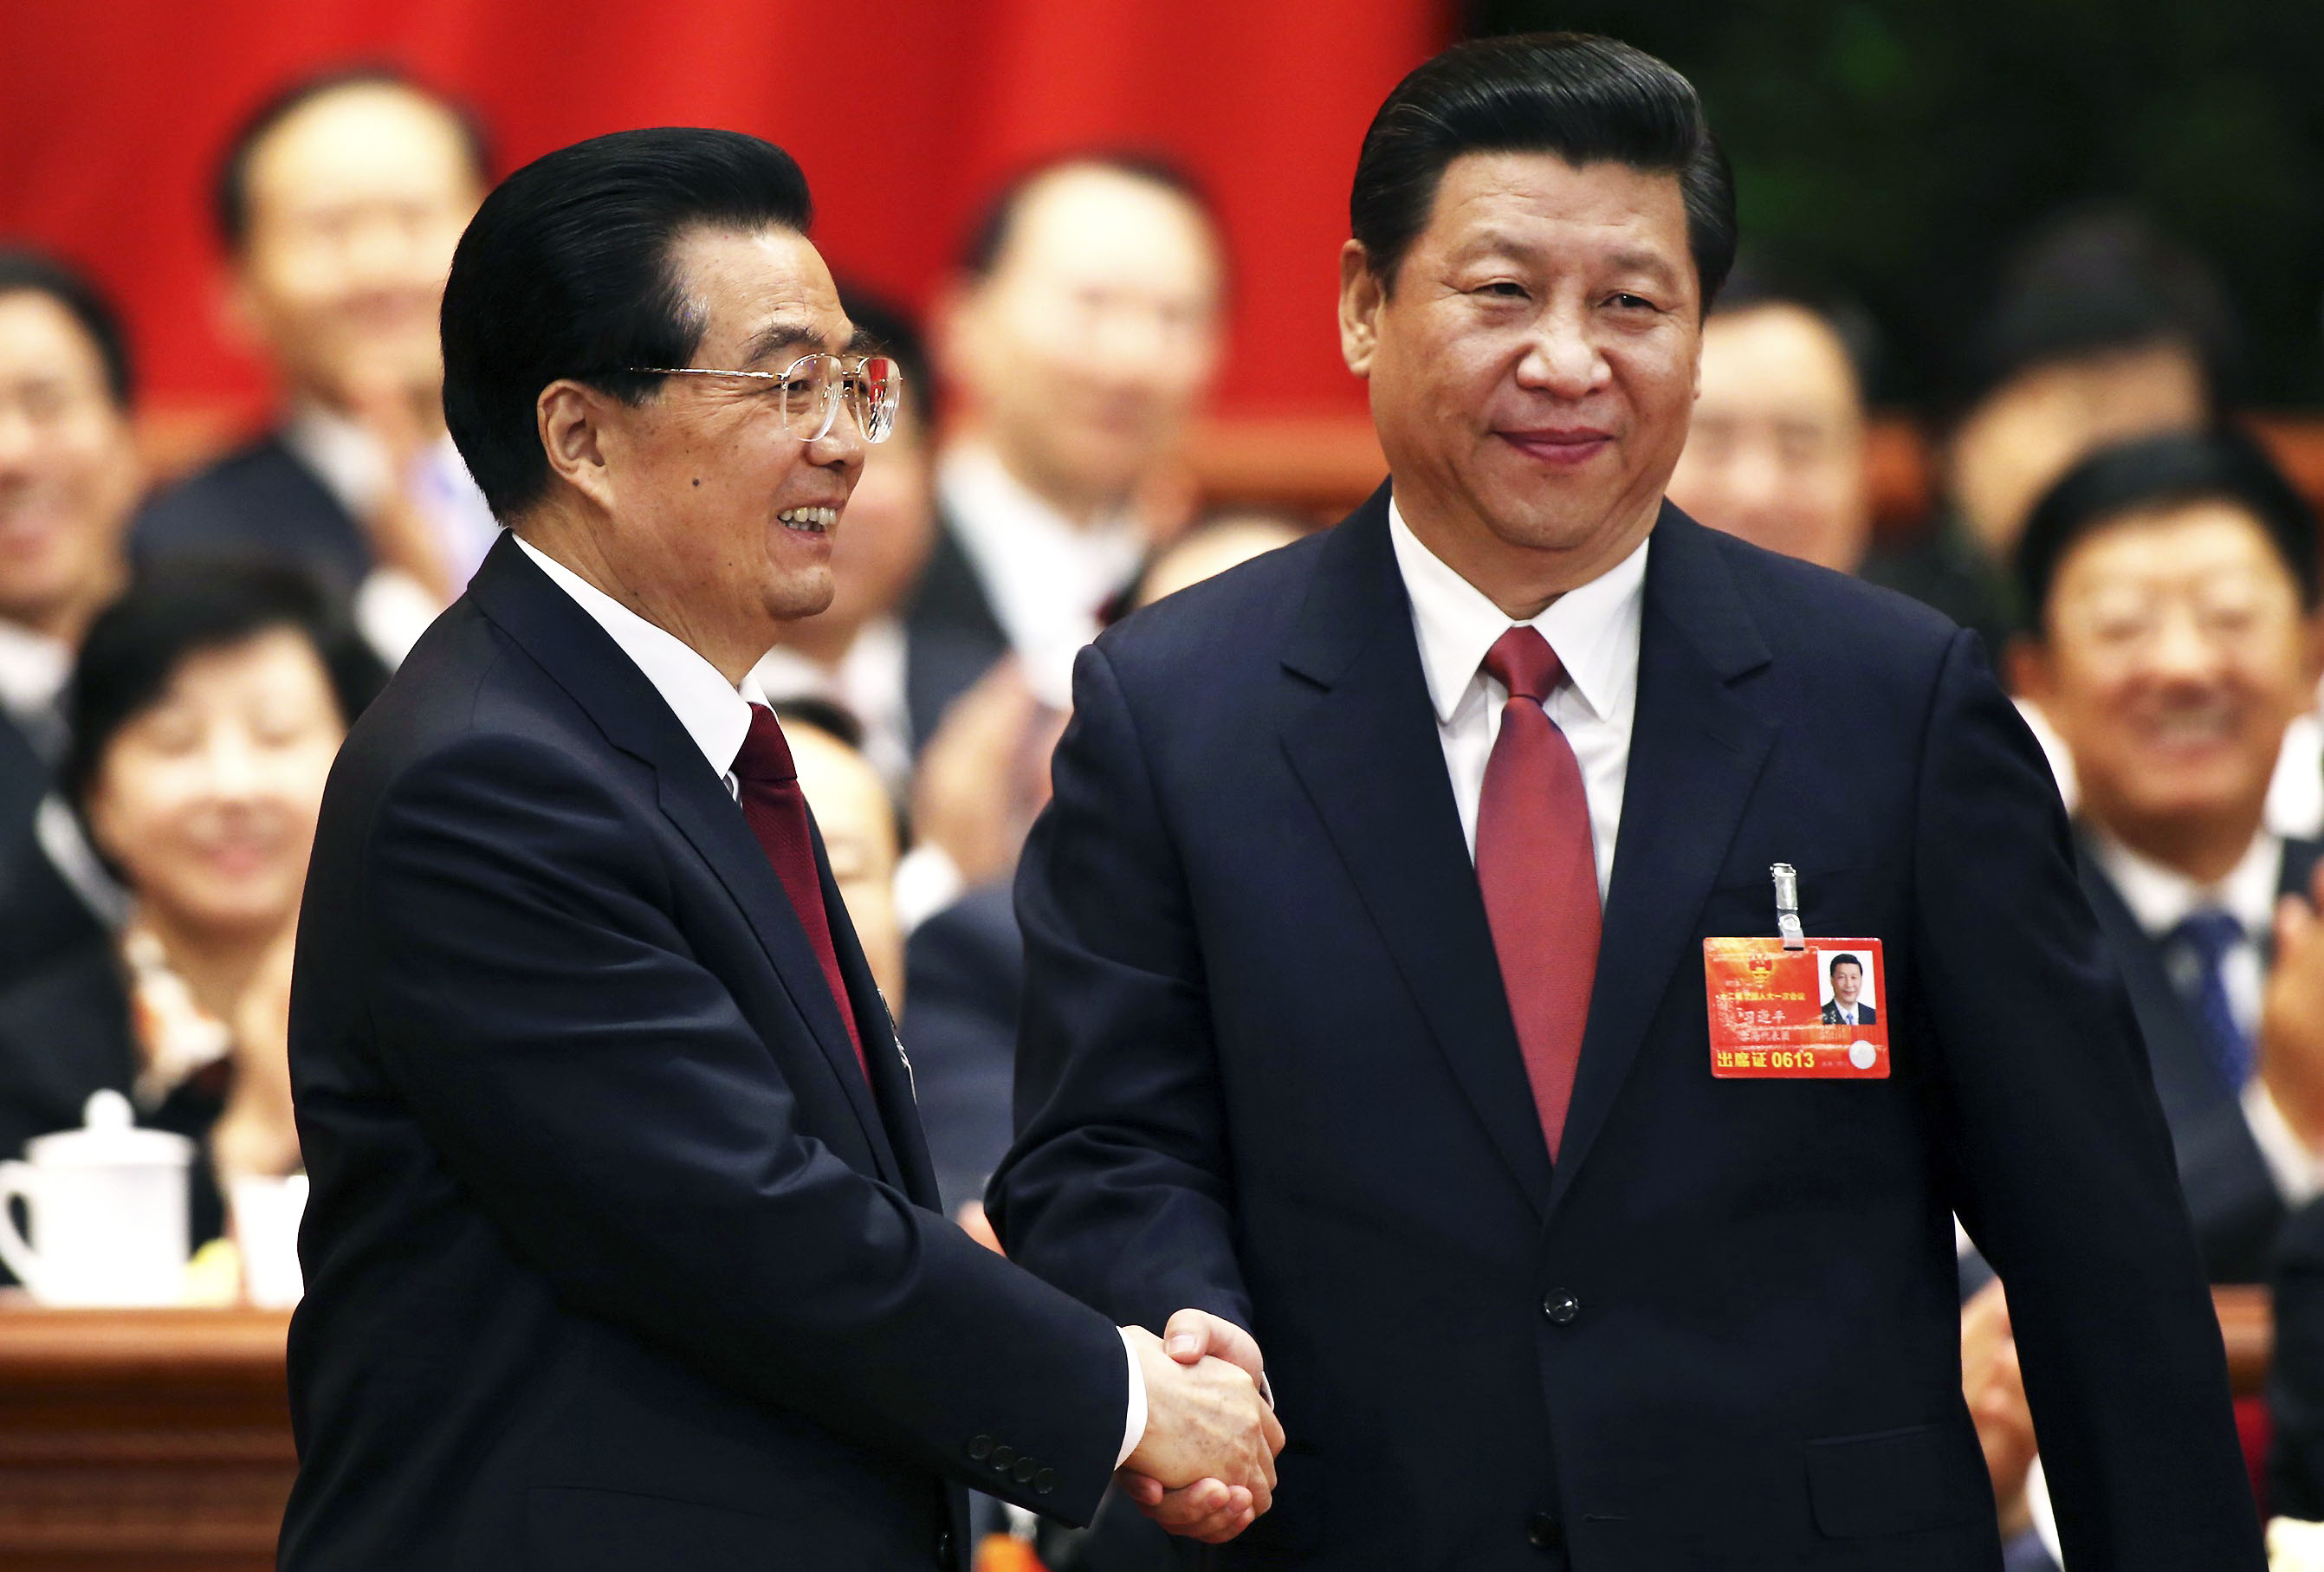 Analysts have said Xi Jinping's (right) roles as head of economic reform and national security groups would give him more power than his predecessor Hu Jintao (left) but liberal party elders say this could prove a double-edged sword. Photo: Reuters
